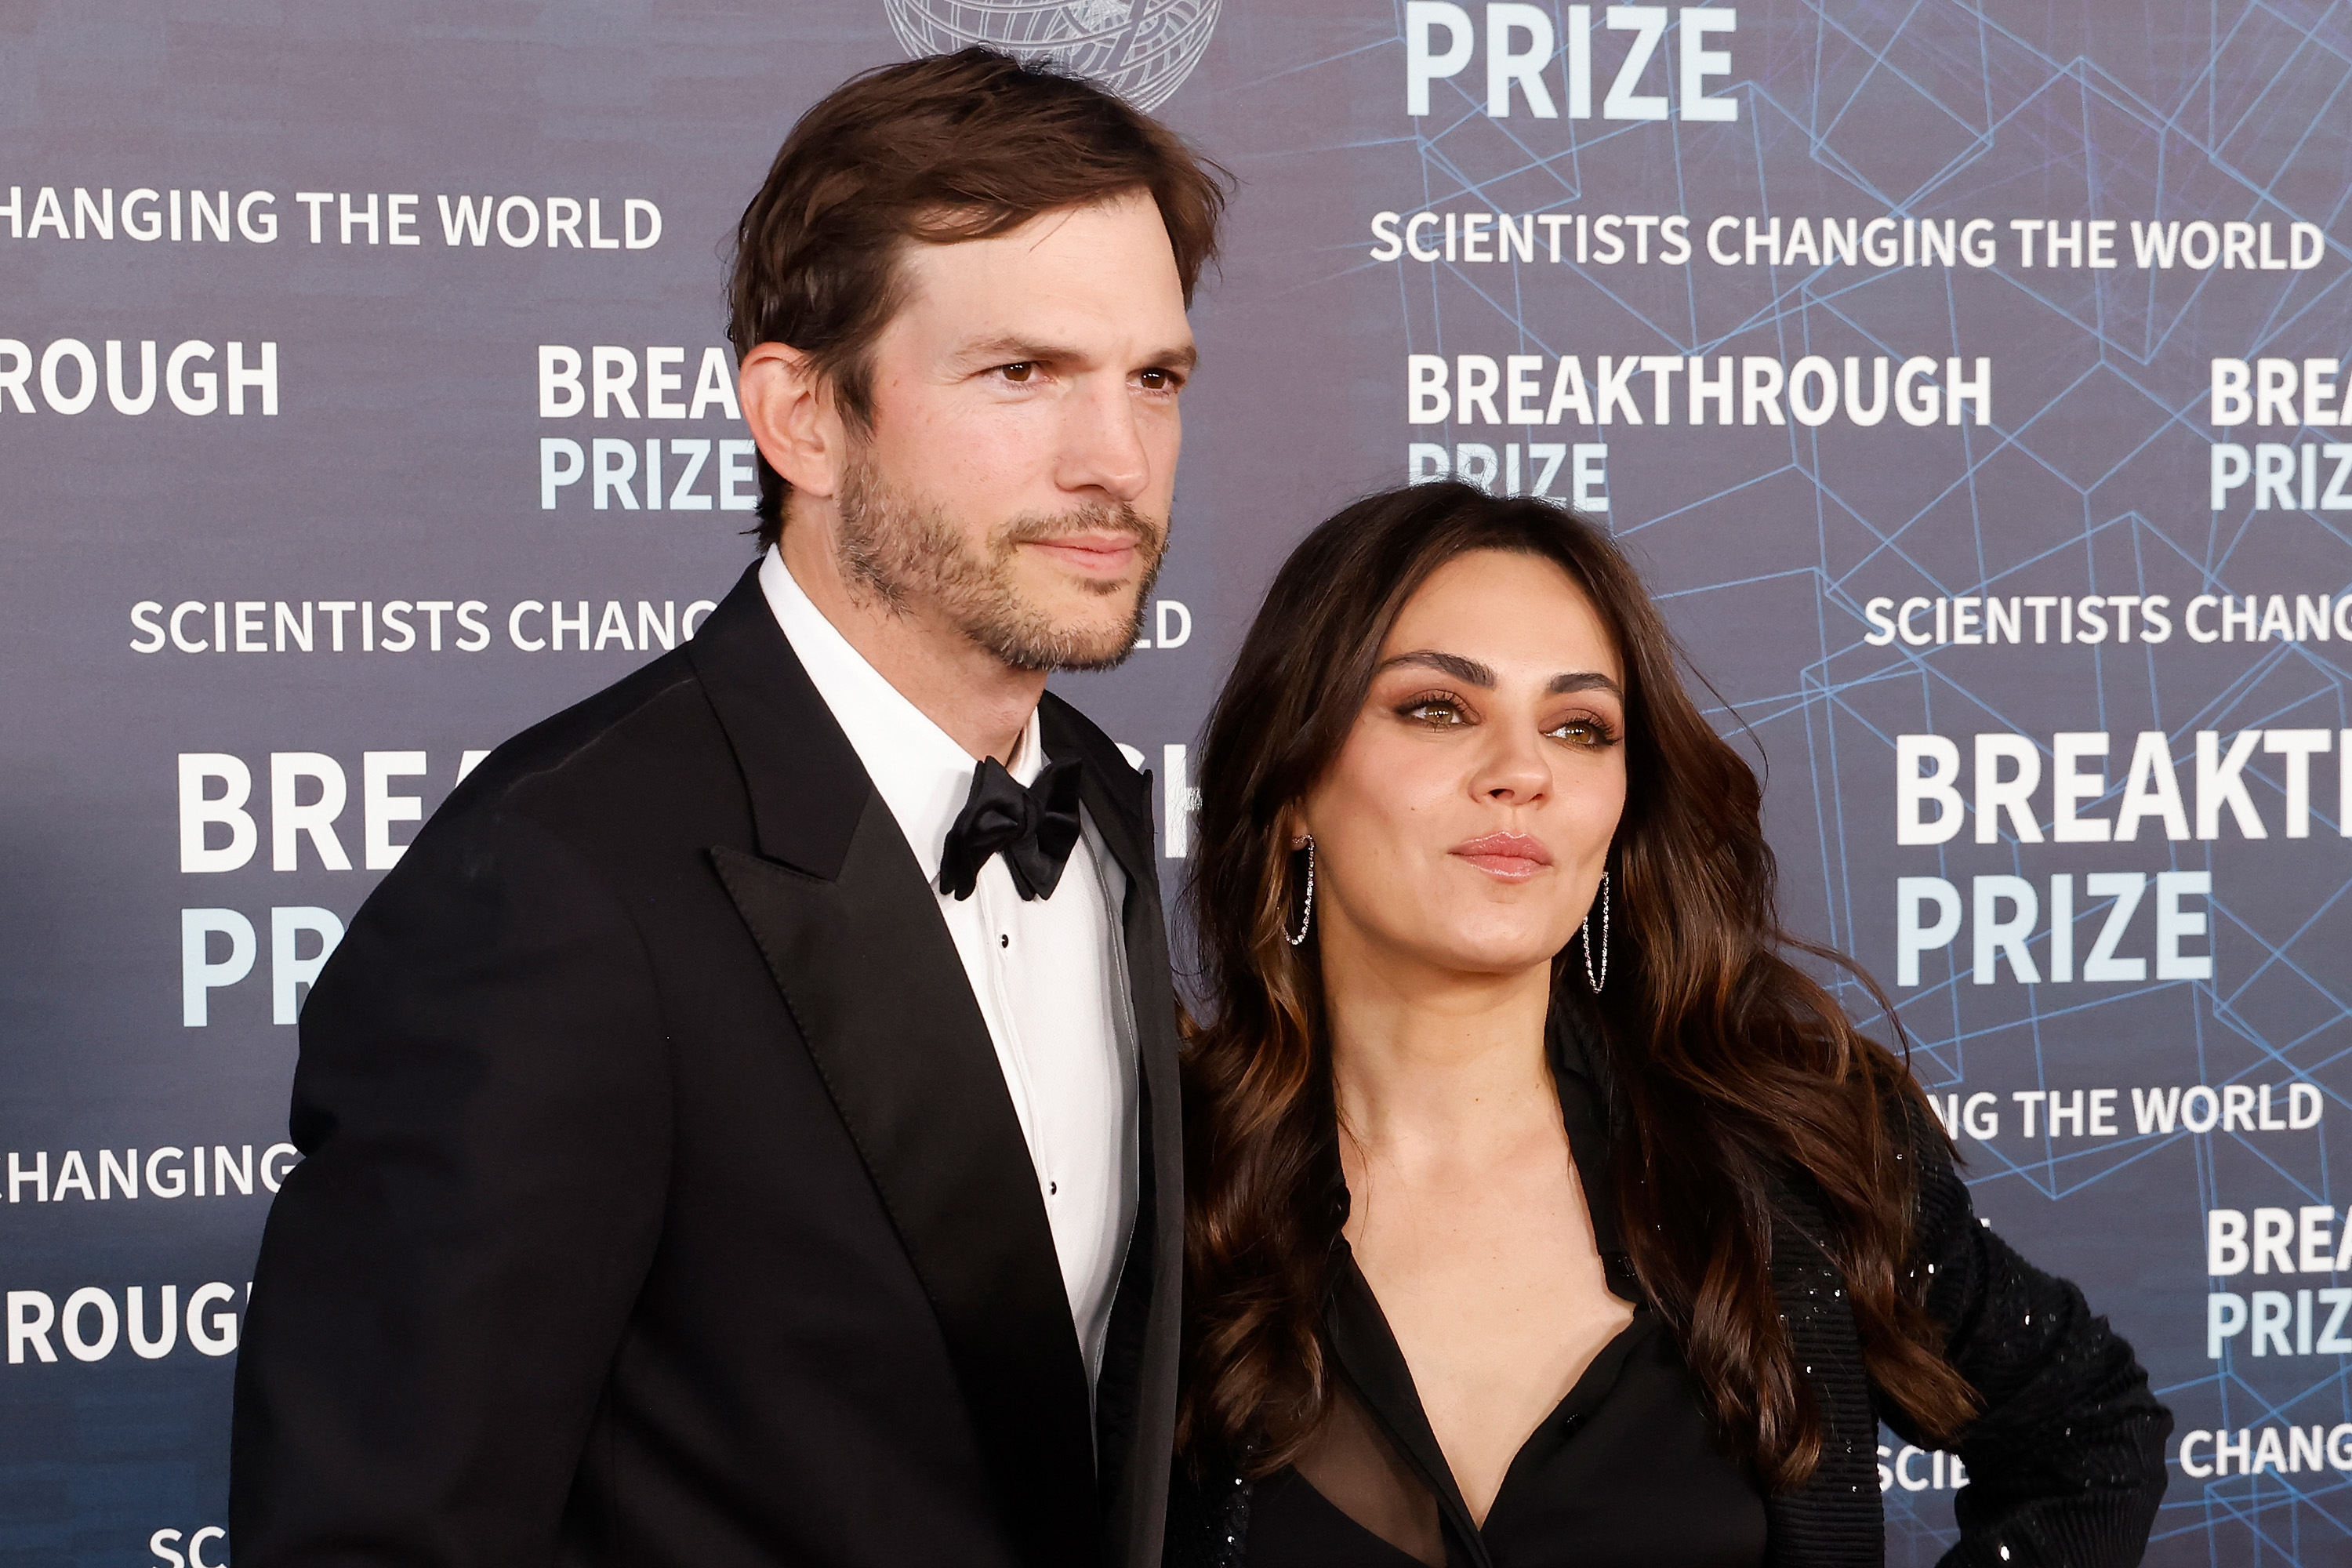 Closeup of Ashton Kutcher and Mila Kunis posing on the red carpet together